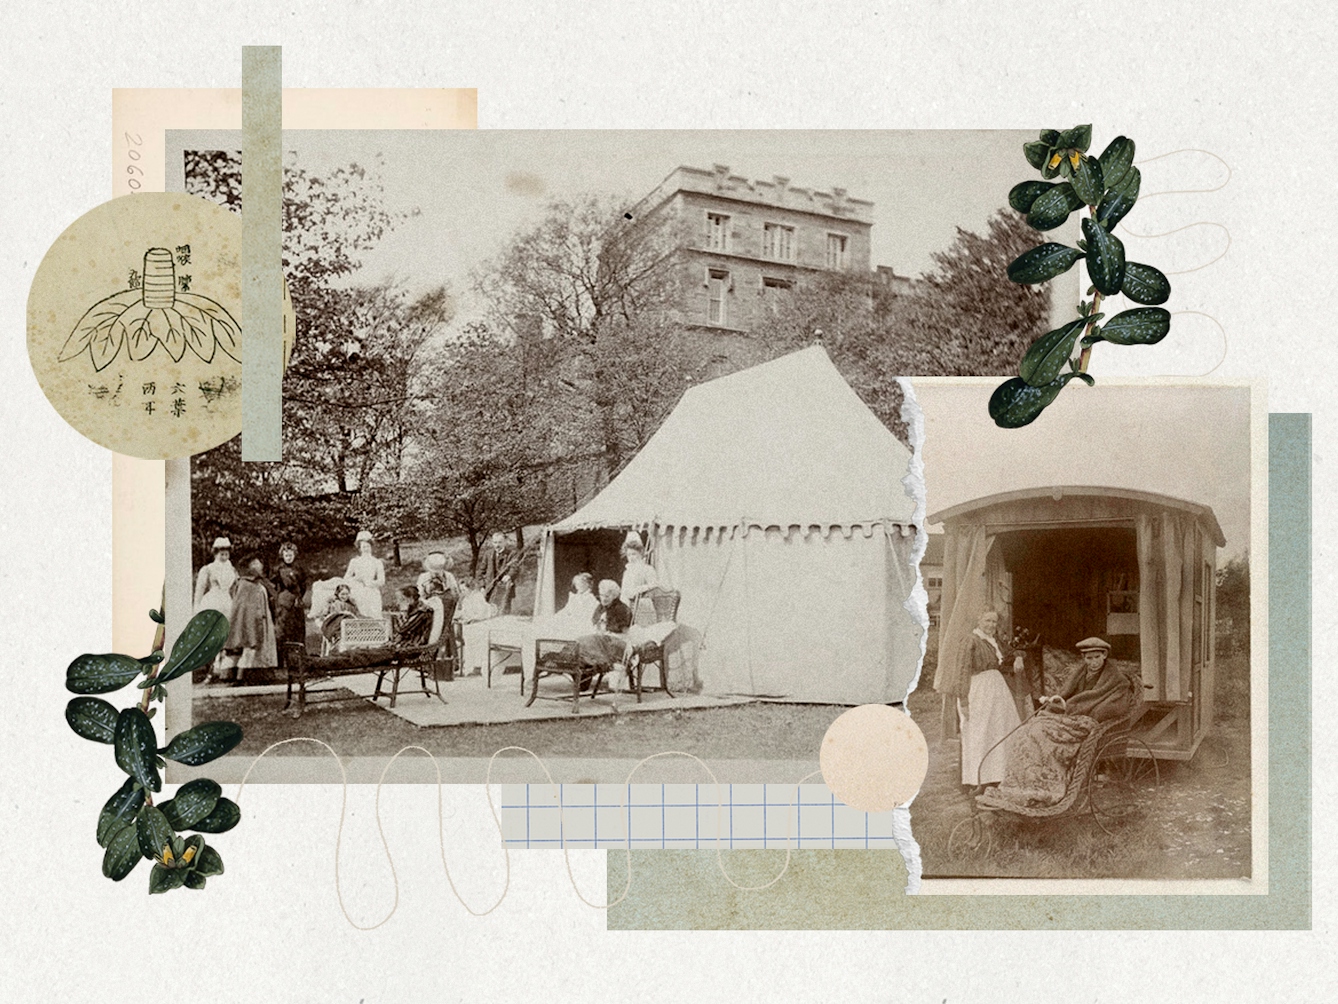 Digital montage artwork using a collage of archive material and photographs. The artwork is full of content comprising elements which have been cut-out and layered on top of each other and around each other. At the centre of the artwork are two archive photographs of a hospital grounds with ‘tent therapies’ where patients lie in beds outside next to a tent. Around these photographs are floral illustrations of leaves and flowers. All the elements are set on a light green textured paper background complete with a white graphic swirling line and a section of graph paper.